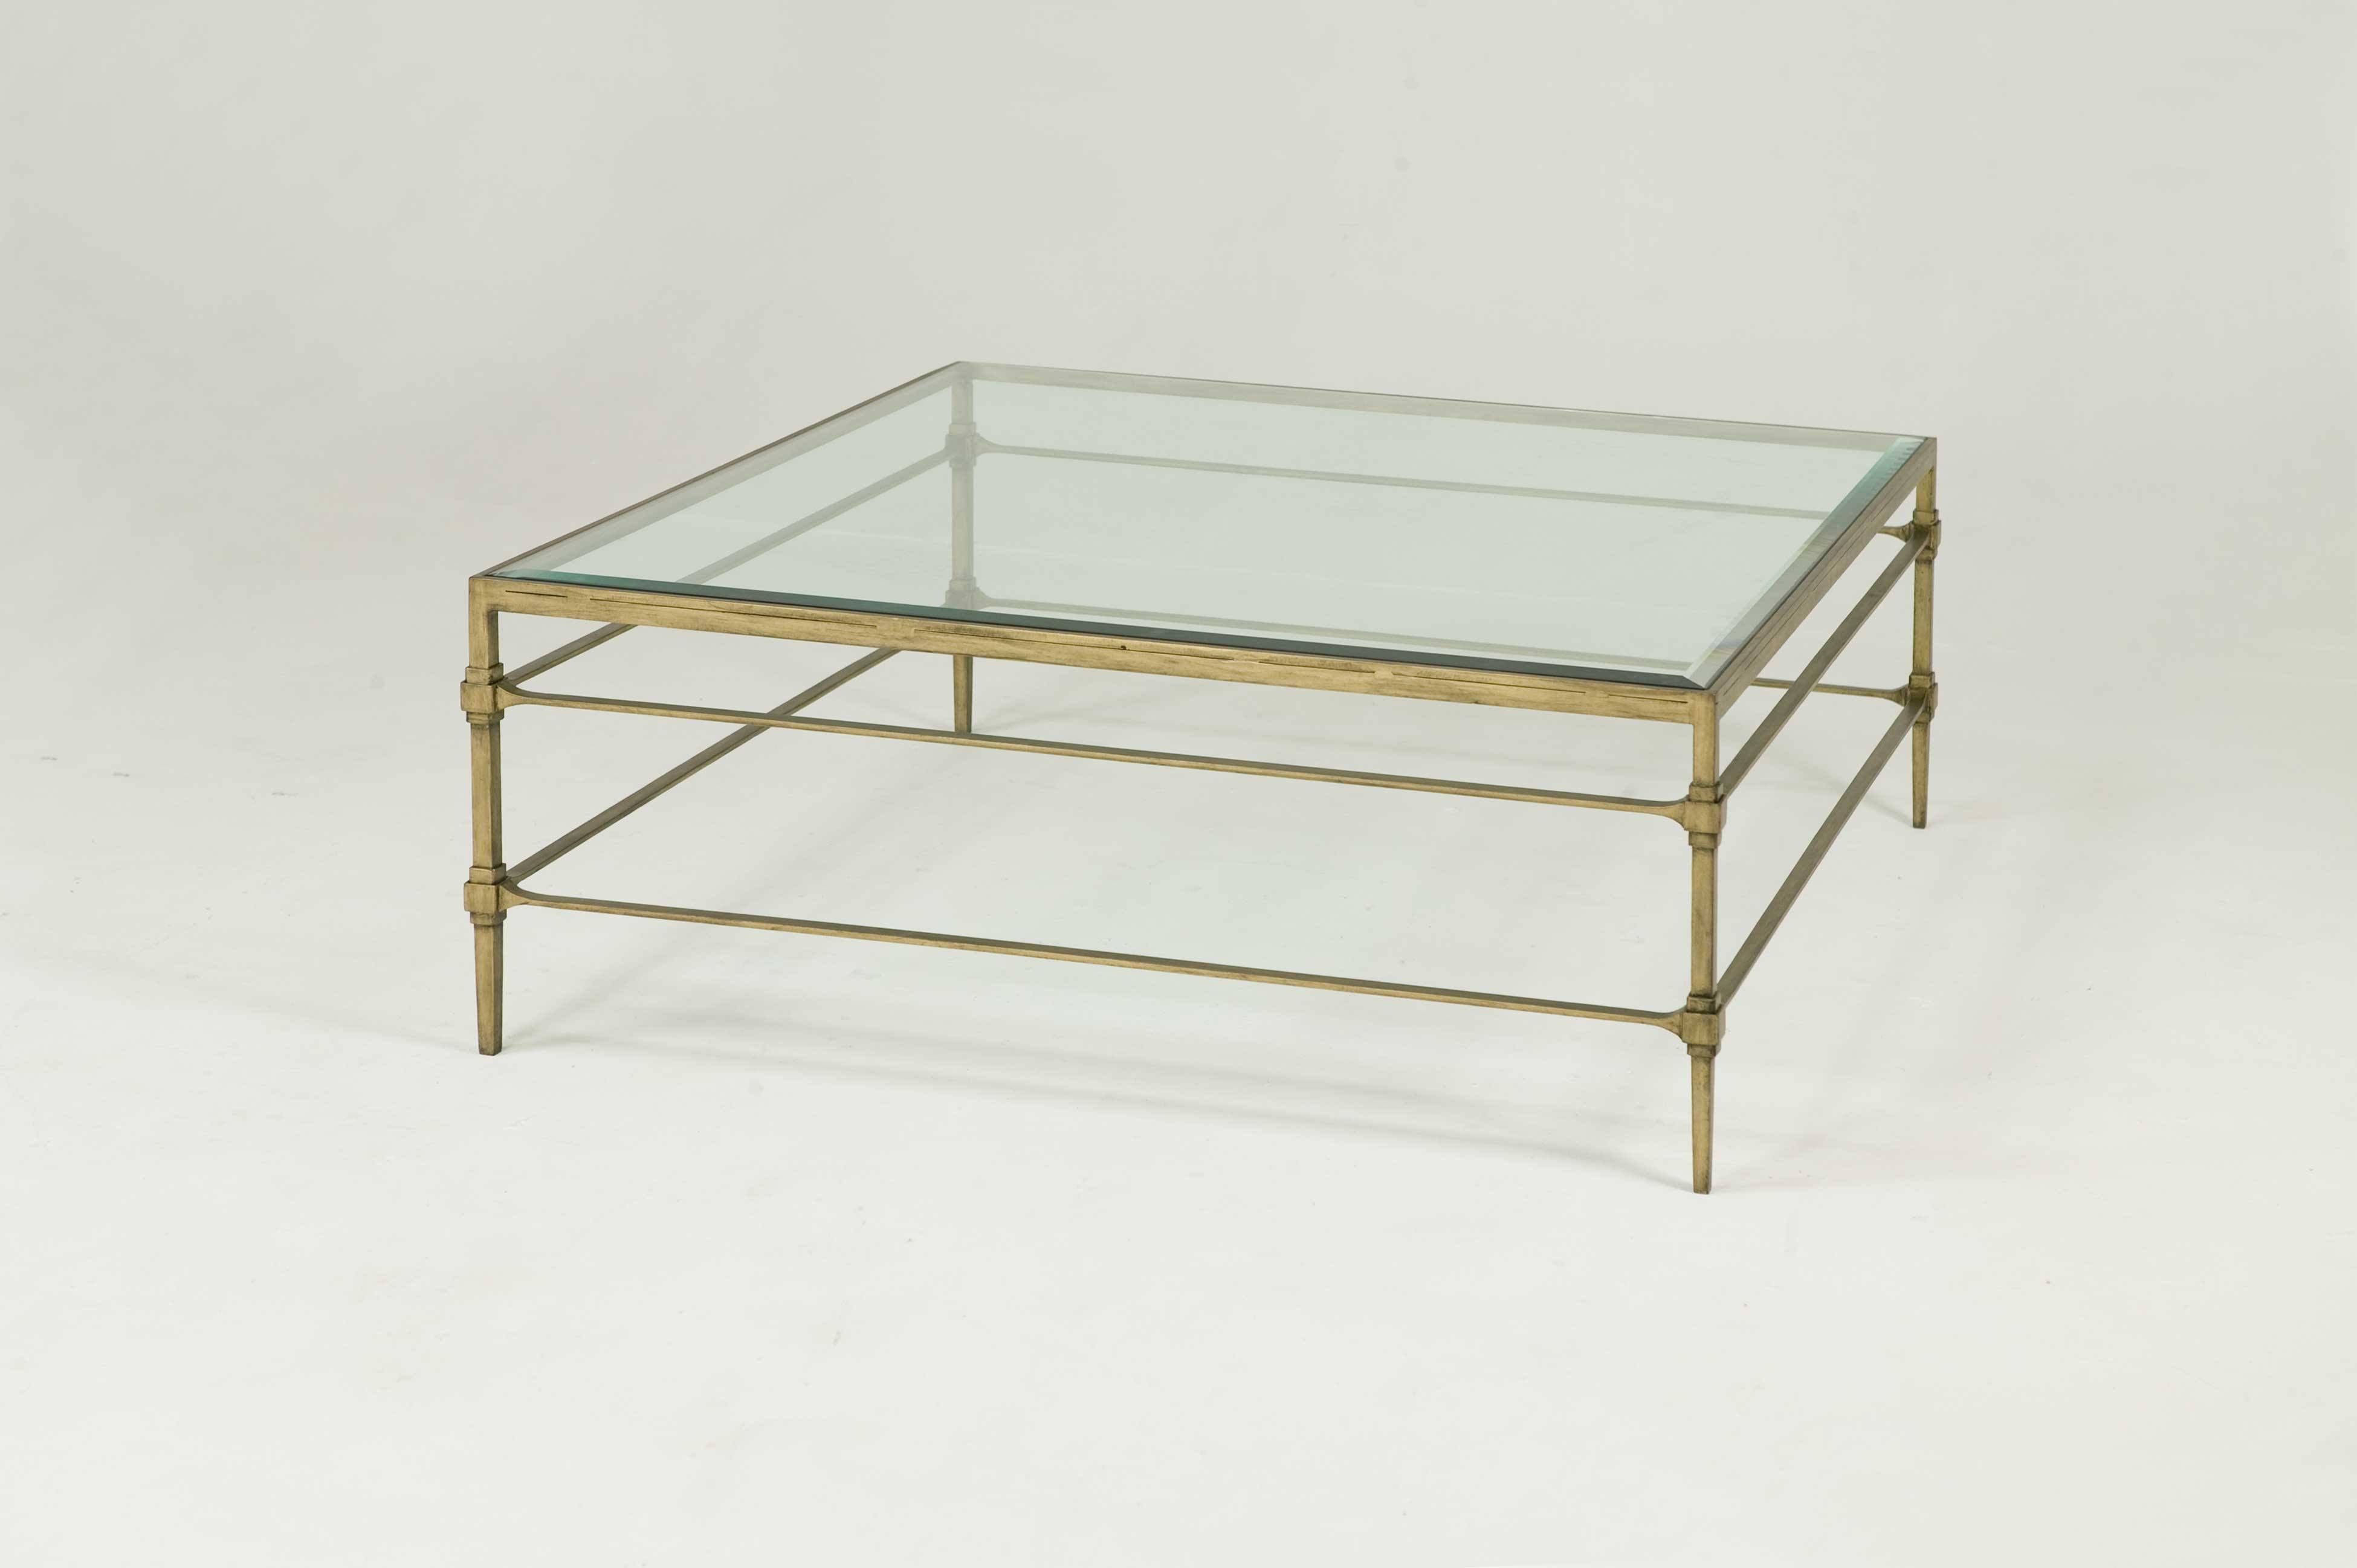 Coffee Table: Astounding Rectangular Glass Coffee Table With Shelf In Coffee Tables Metal And Glass (View 11 of 30)